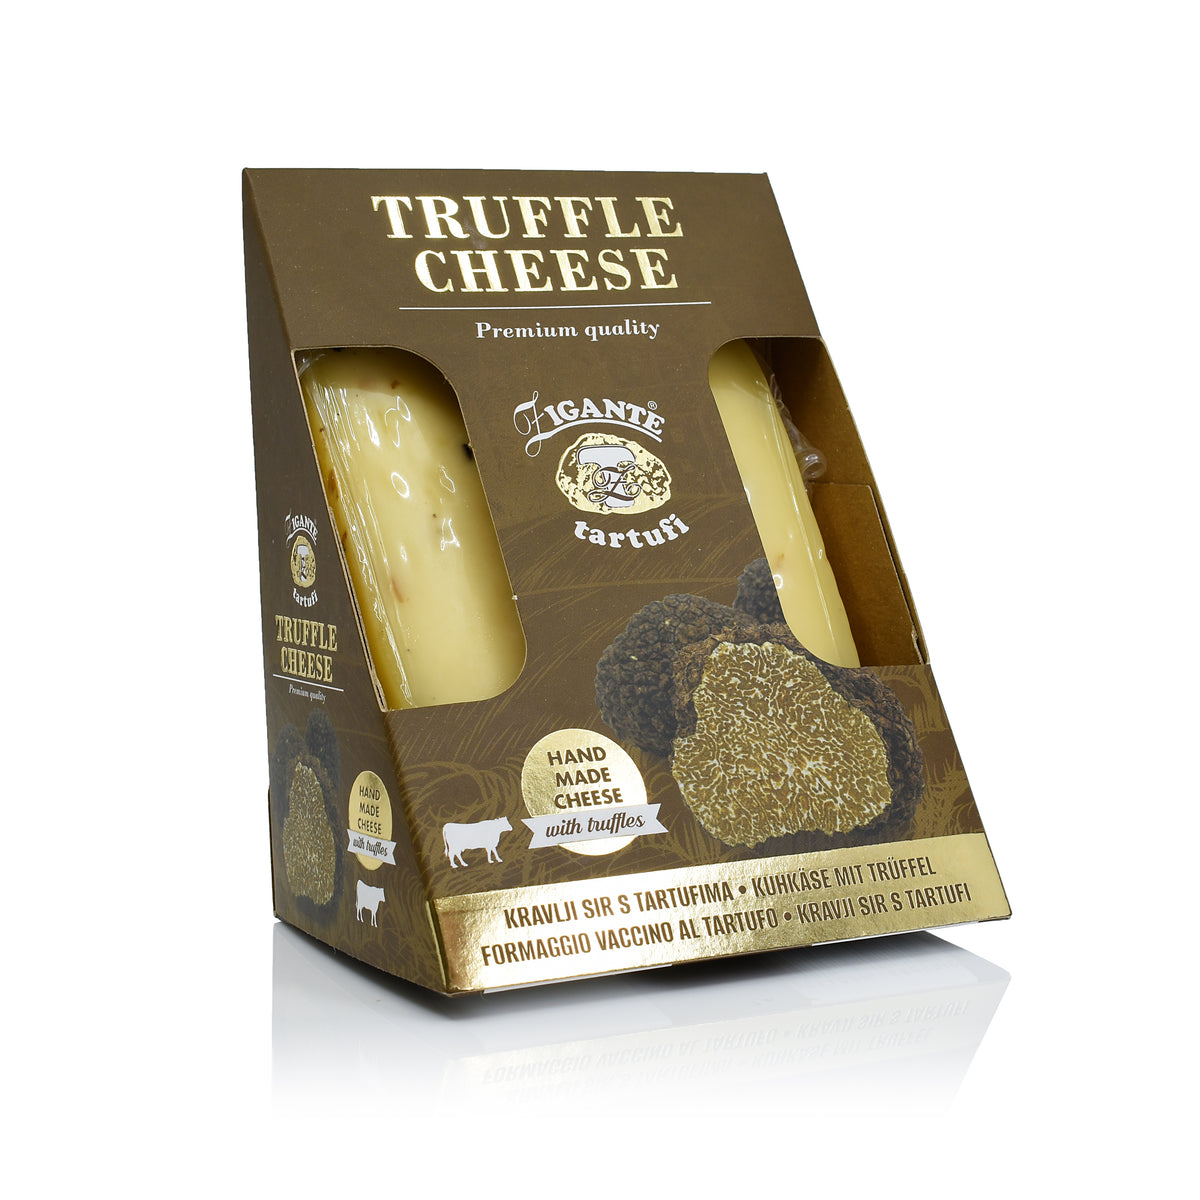 Hand made cheese with truffles